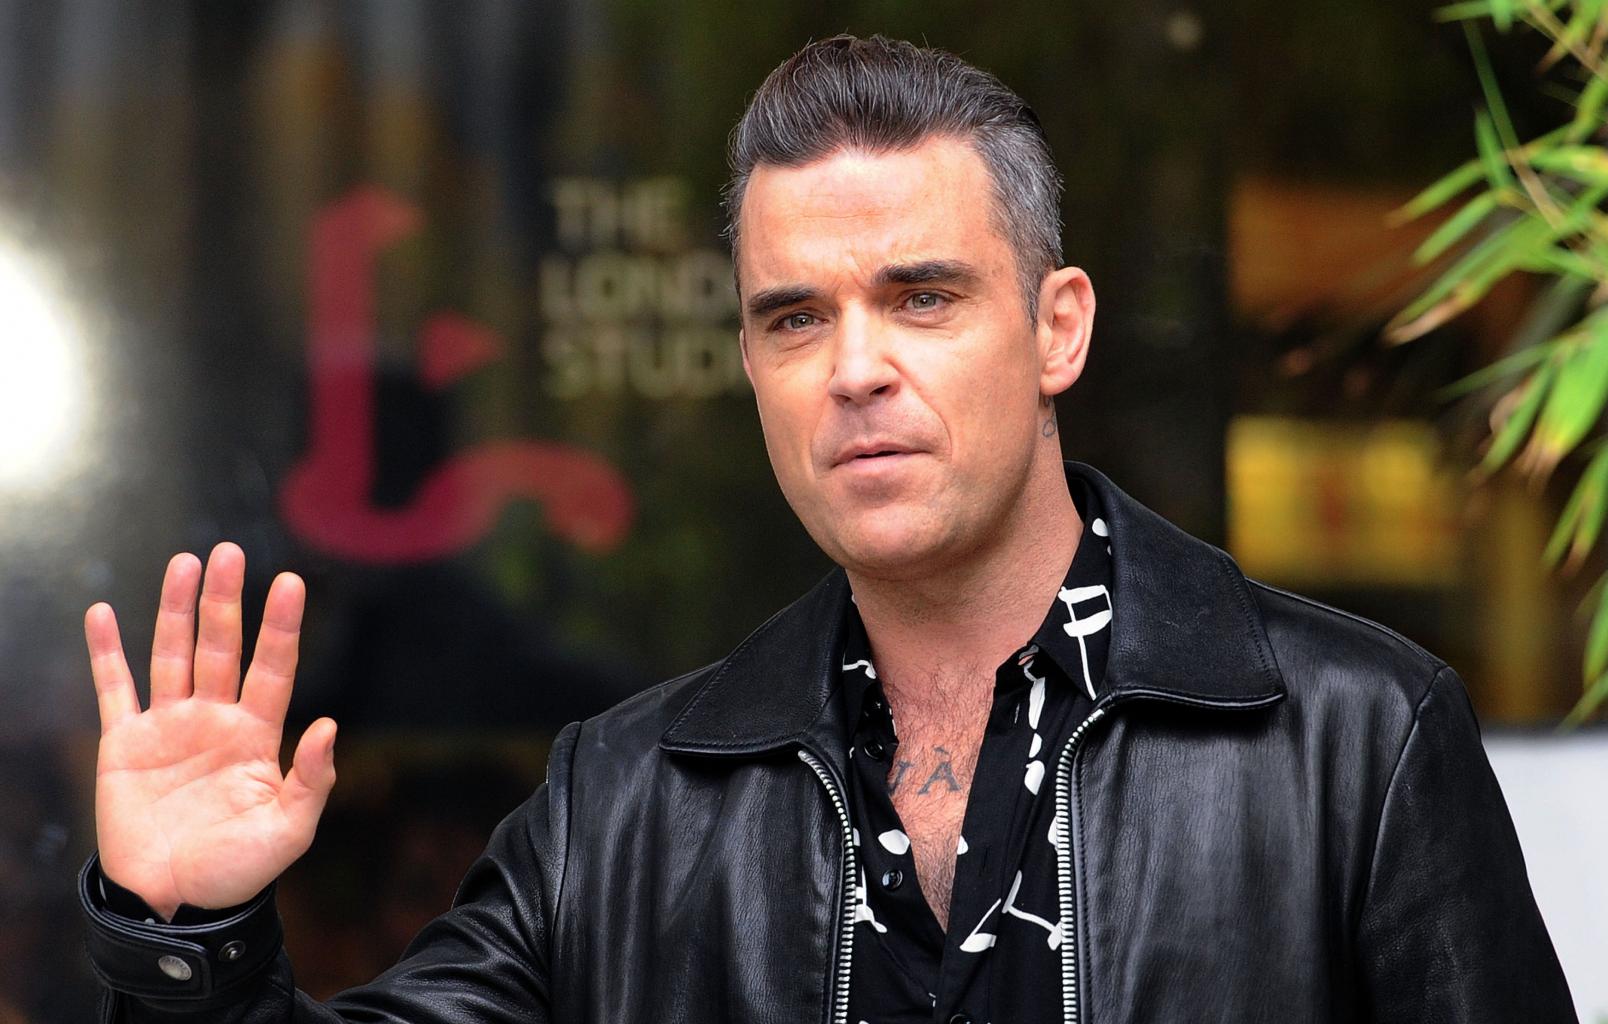 Robbie Williams Breaks Down In Tears While Dedicating Song To Manchester Victims